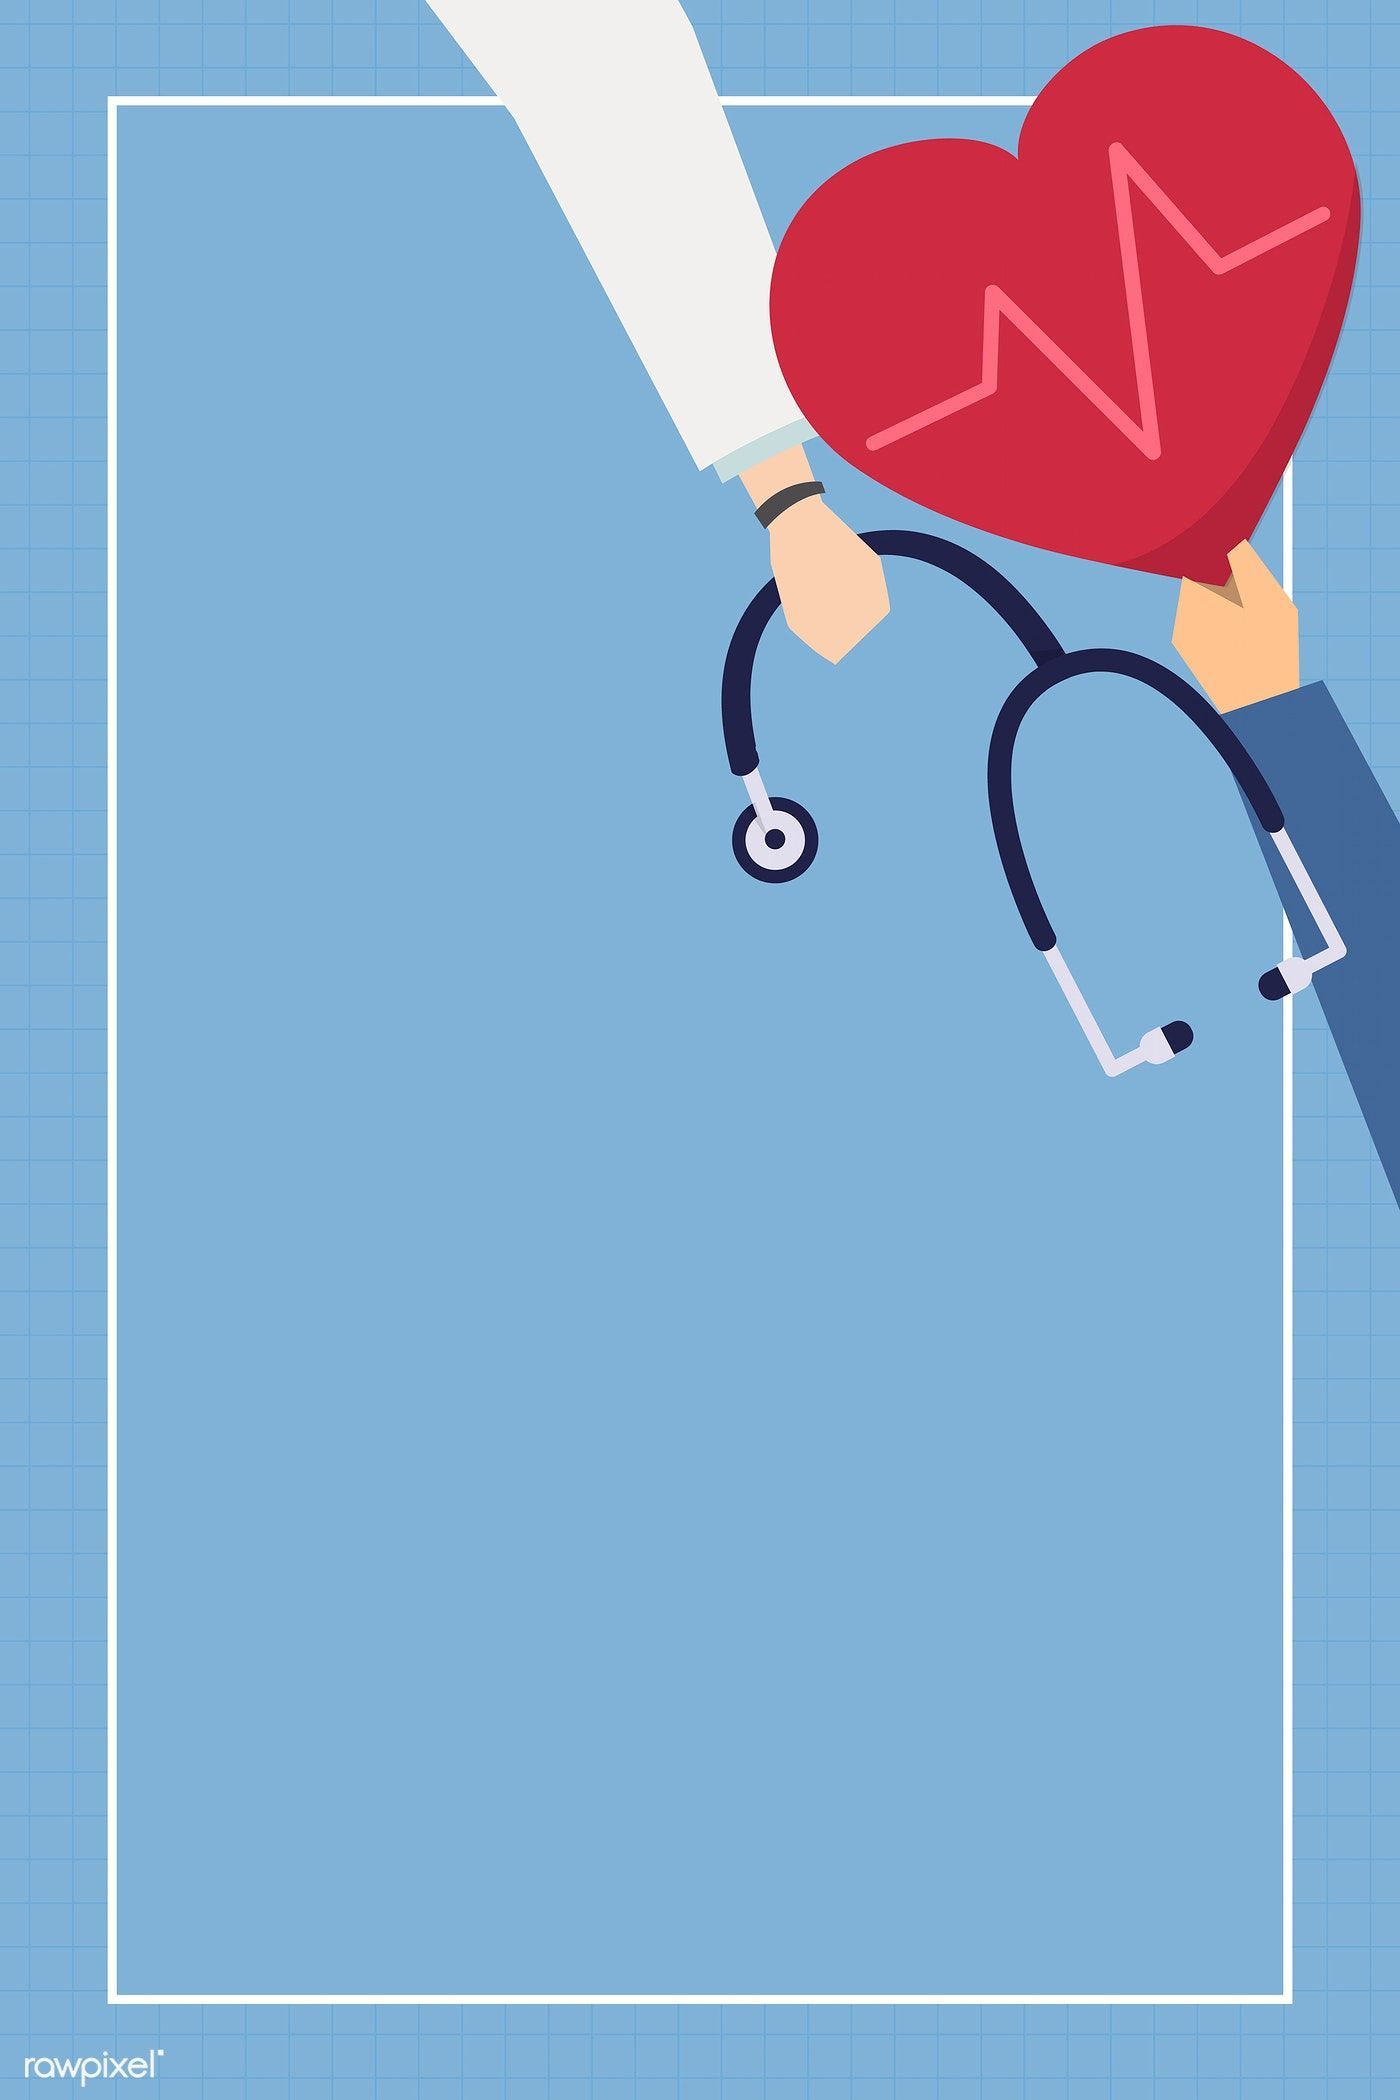 Download premium vector of Health care themed frame vector 2224628